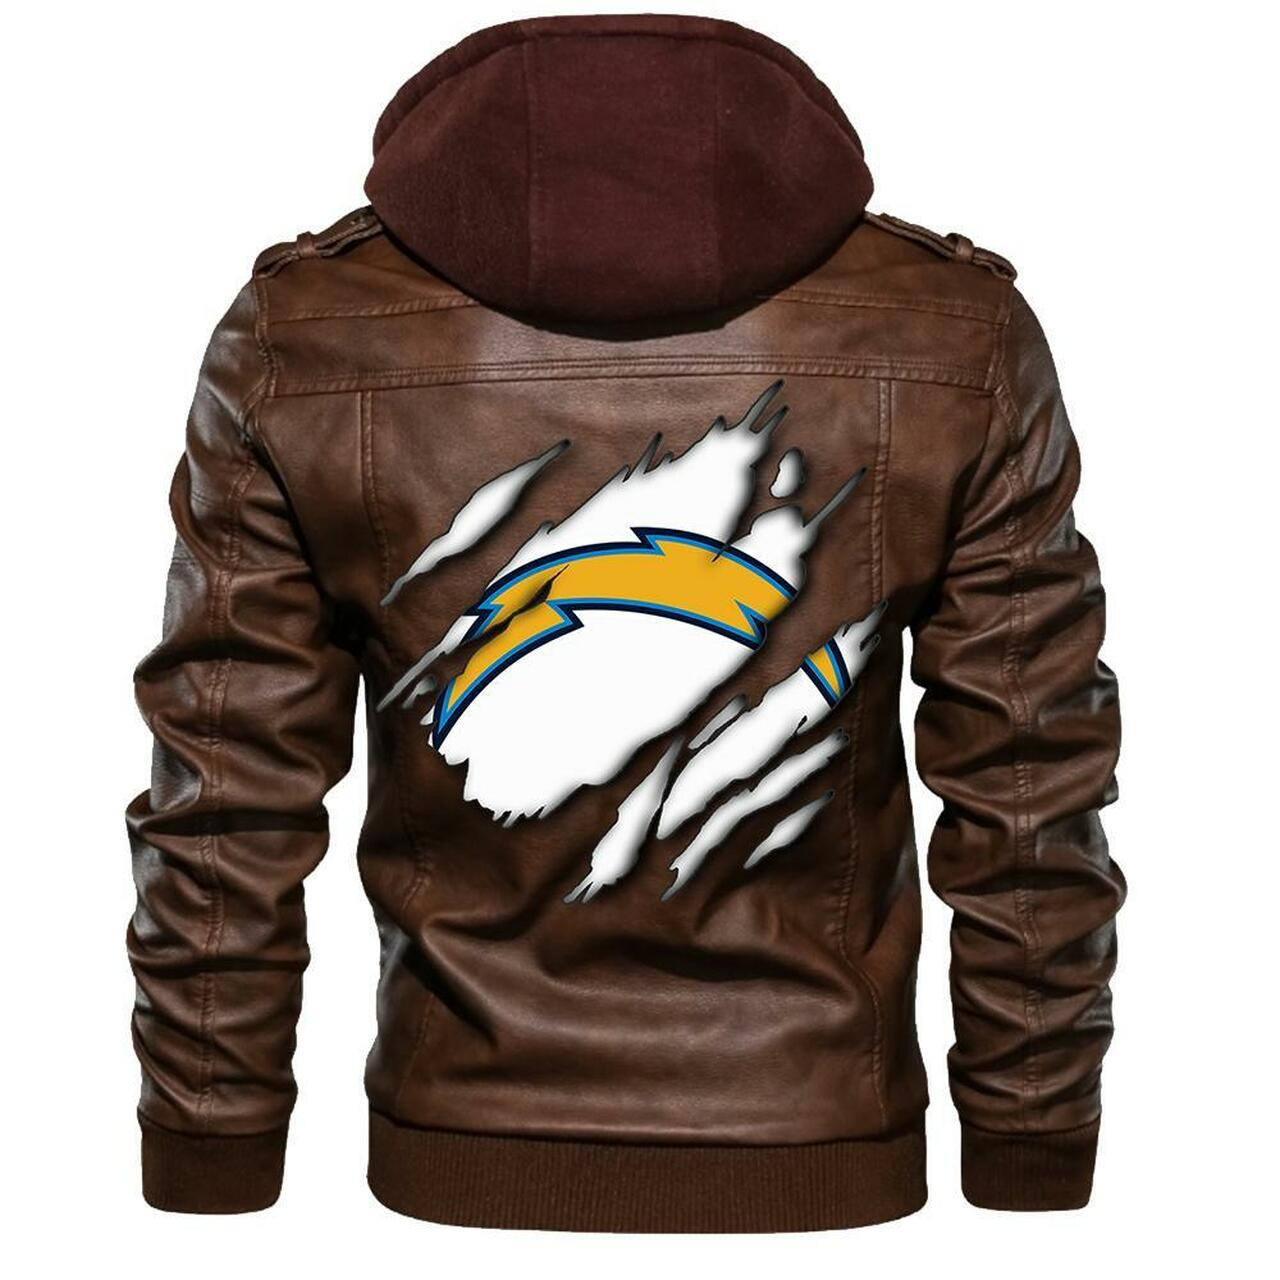 Check out and find the right leather jacket below 351